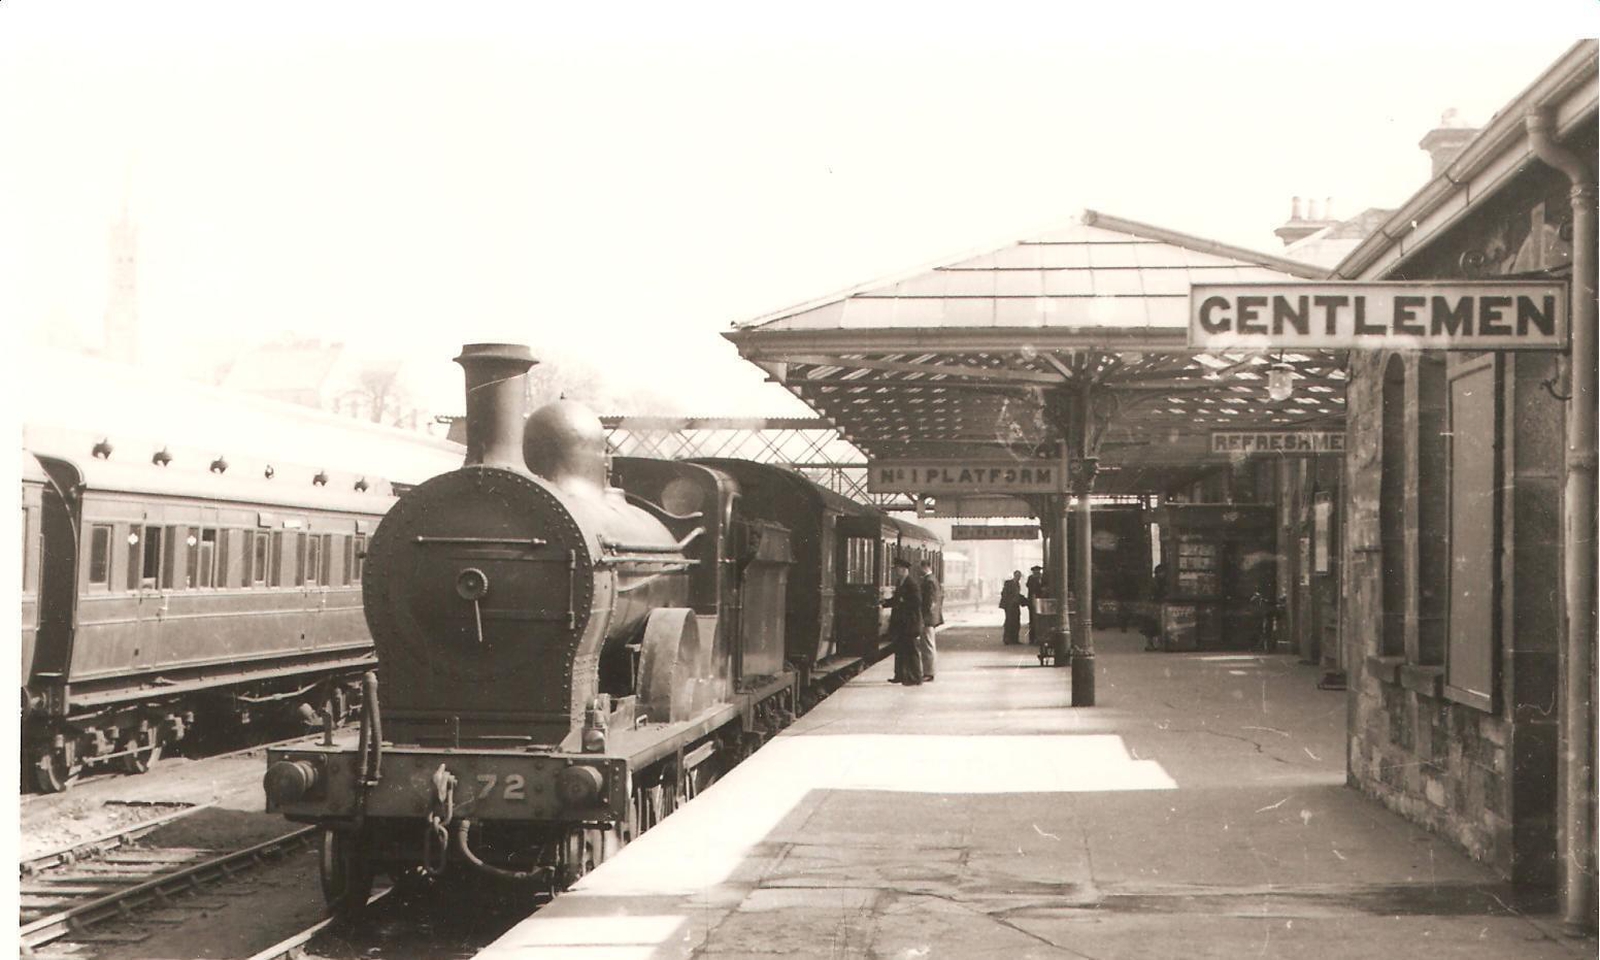 Image - Clones Railway Station (Courtesy of Charles Friel)